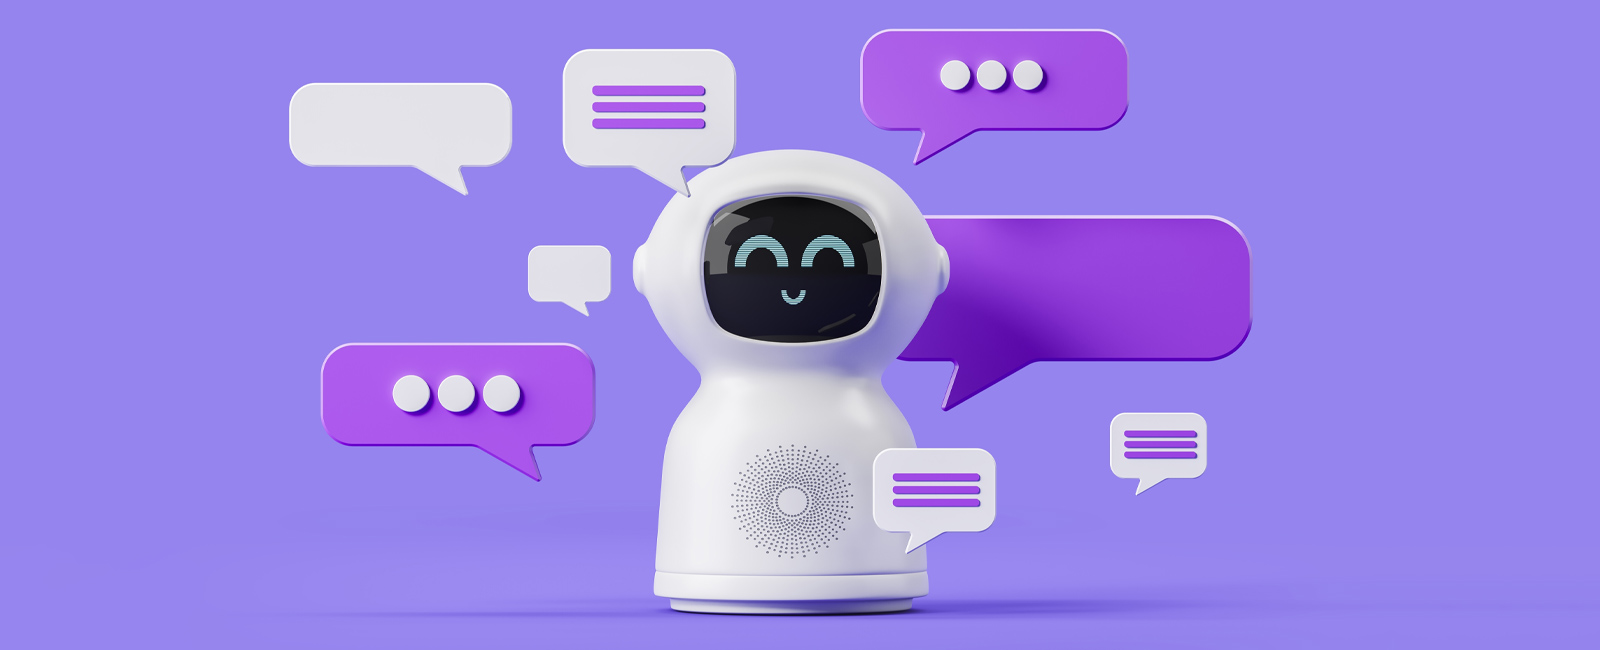 The Canvas Chatbot: How Northwestern University Built Its Own AI-Enabled Tool